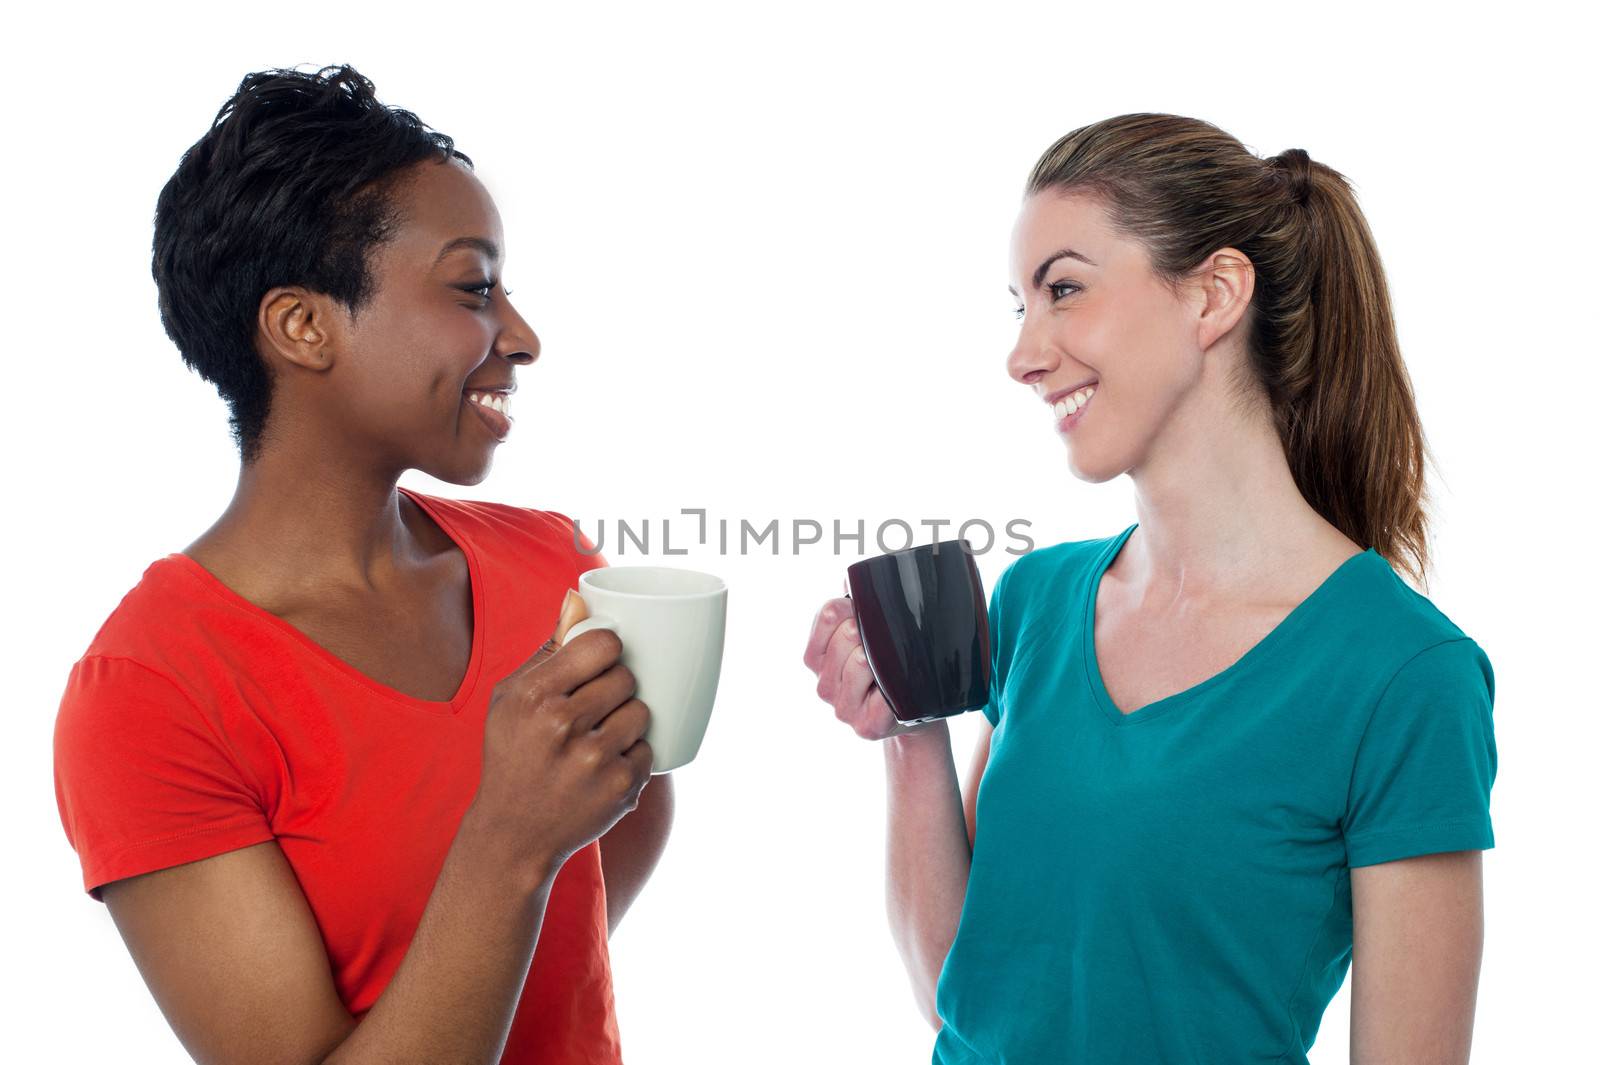 Casual women enjoying coffee by stockyimages